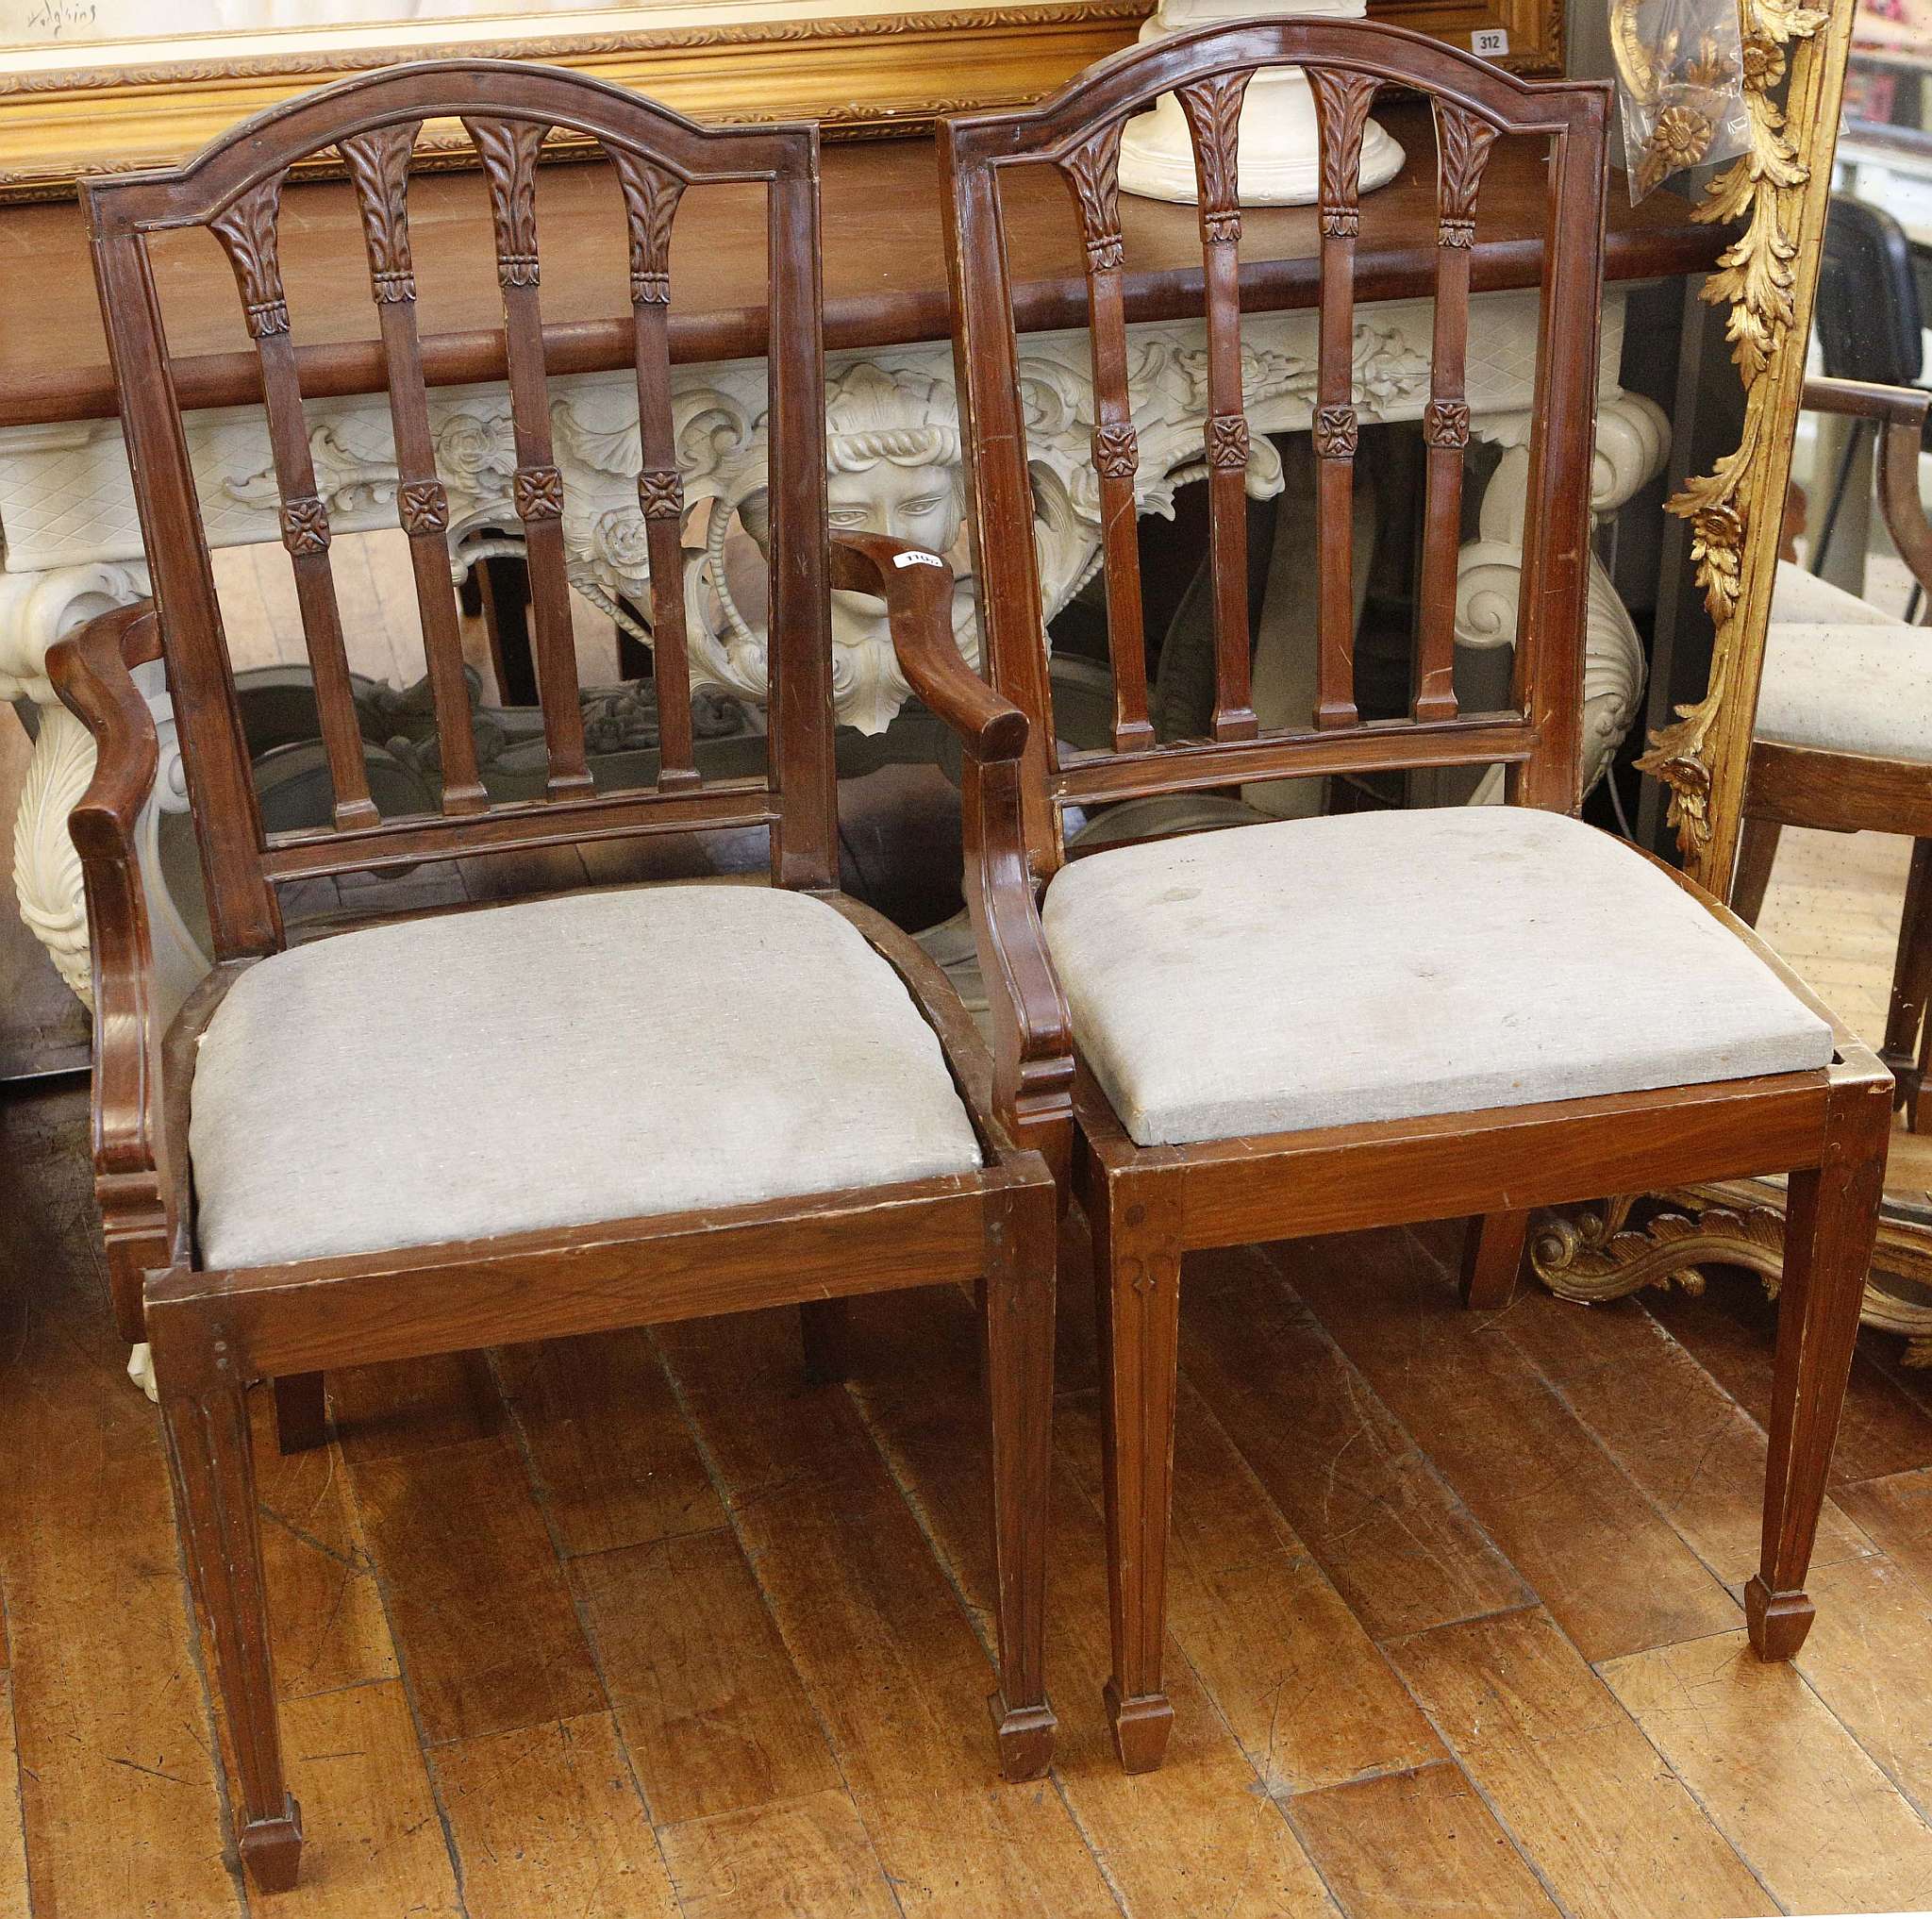 A set of 12 Edwardian dining chairs, stamped F.H.